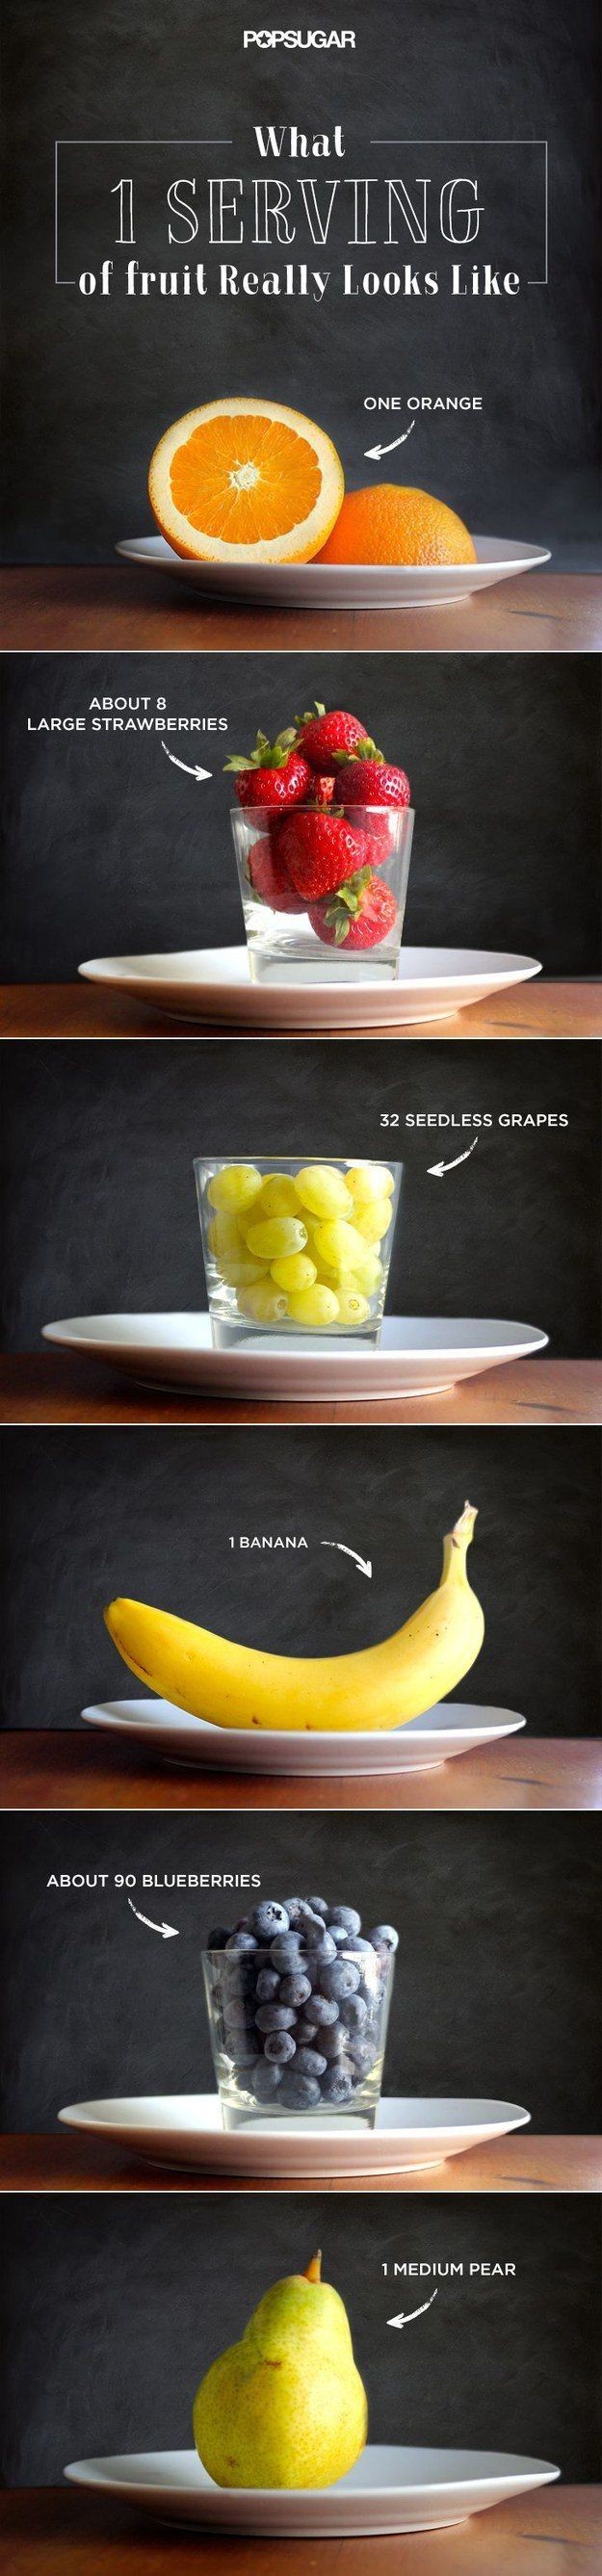 24 Must-See Diagrams That Will Make Eating Healthy...